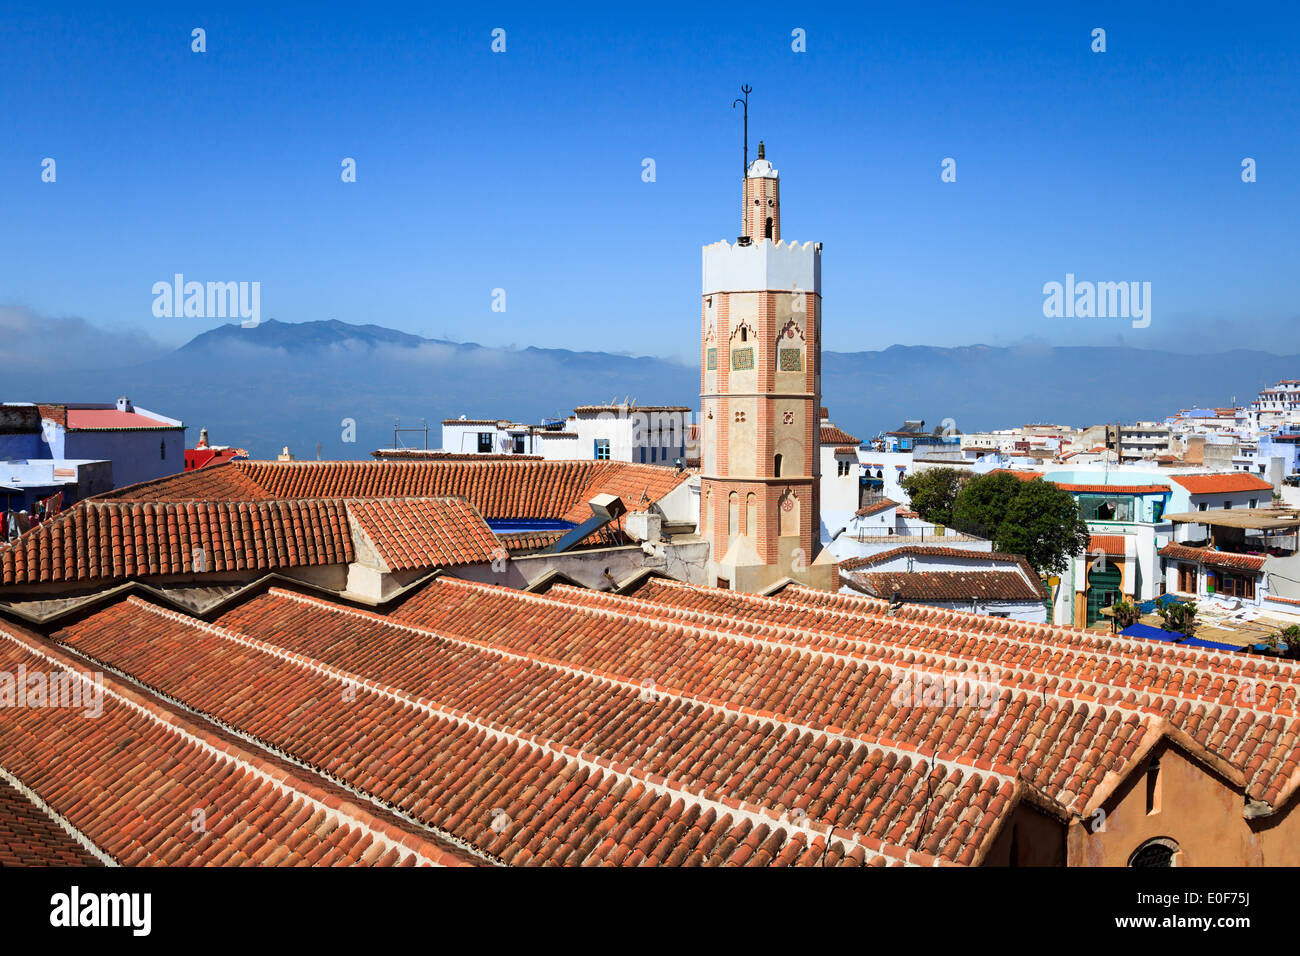 View of chefchaouen from the kasbah, morocco Stock Photo